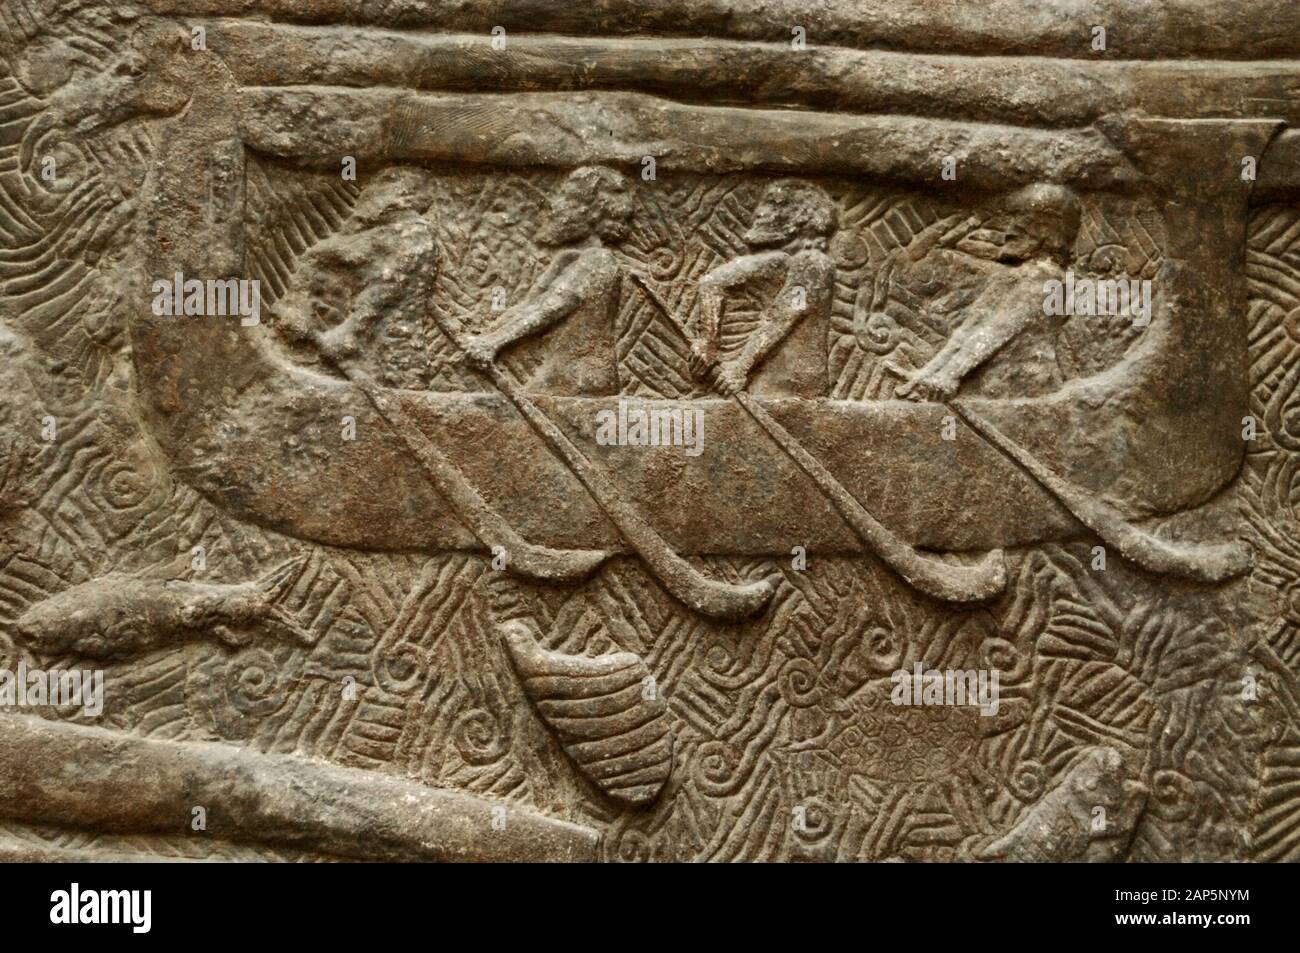 Frieze of the transportation of timber (cedars of Lebanon). Detail of one of the reliefs from the Palace of King Sargon II in Dur Sharrukin (Khorsabad, Iraq), 8th century. Northern facade. Museum of Louvre. Paris, France. Stock Photo